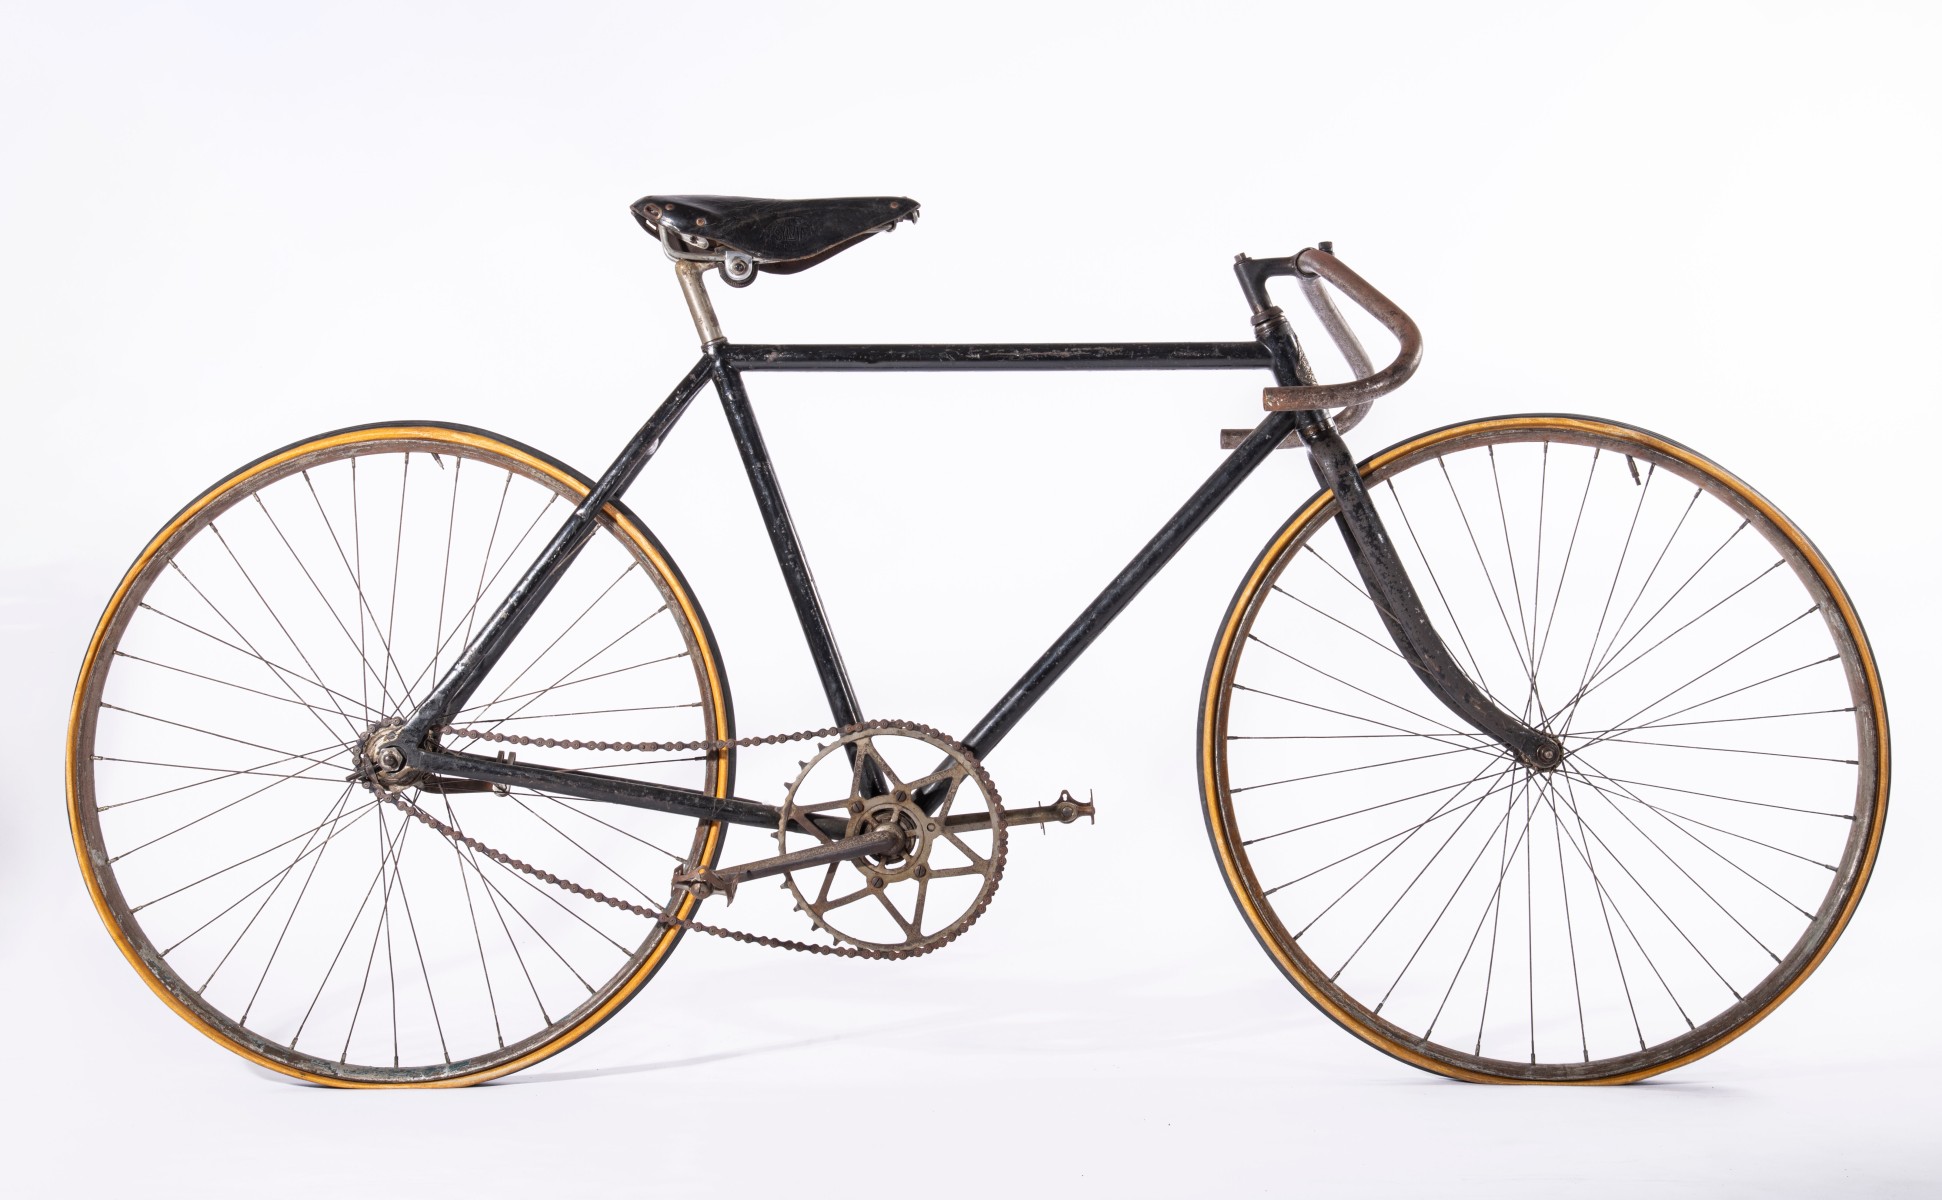 Track bicycle made by SHB, type racer, in Newport (New York), ca. 1890-1910.